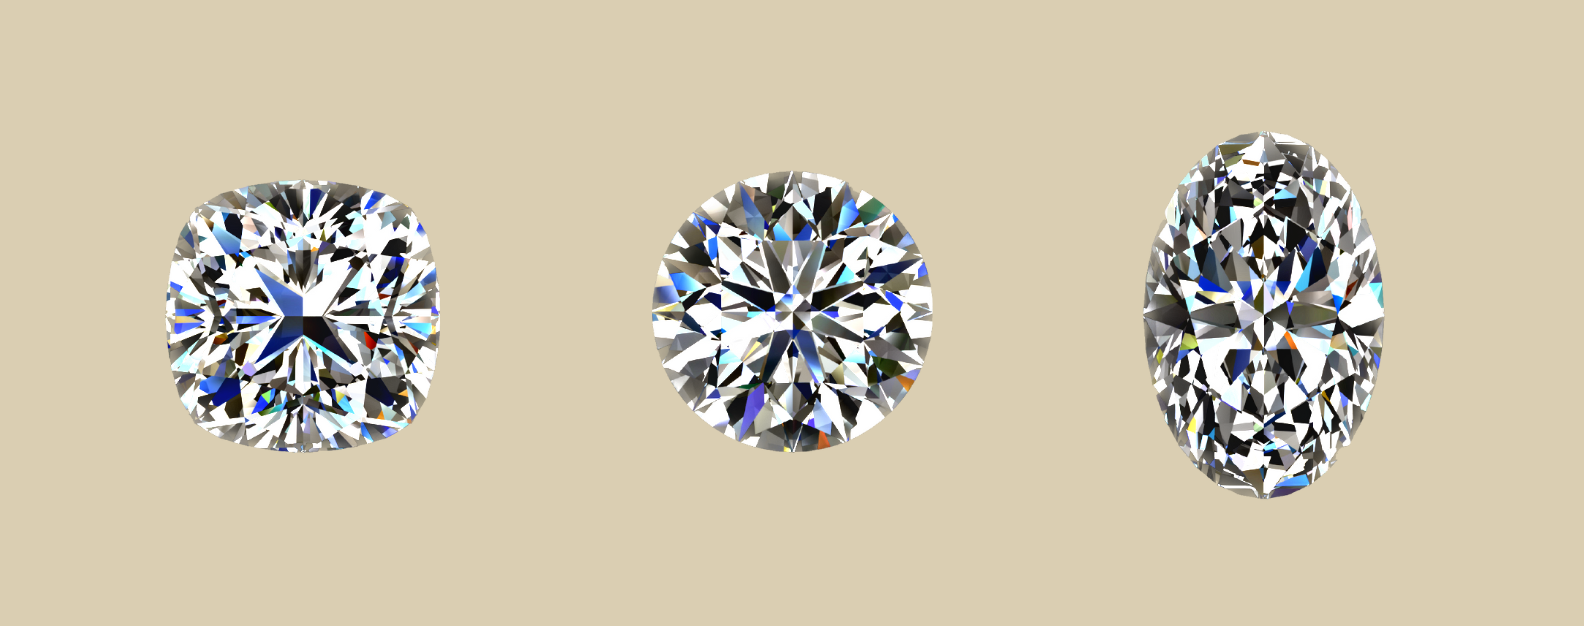 3 Types of diamond cuts, round, cushion, and oval.